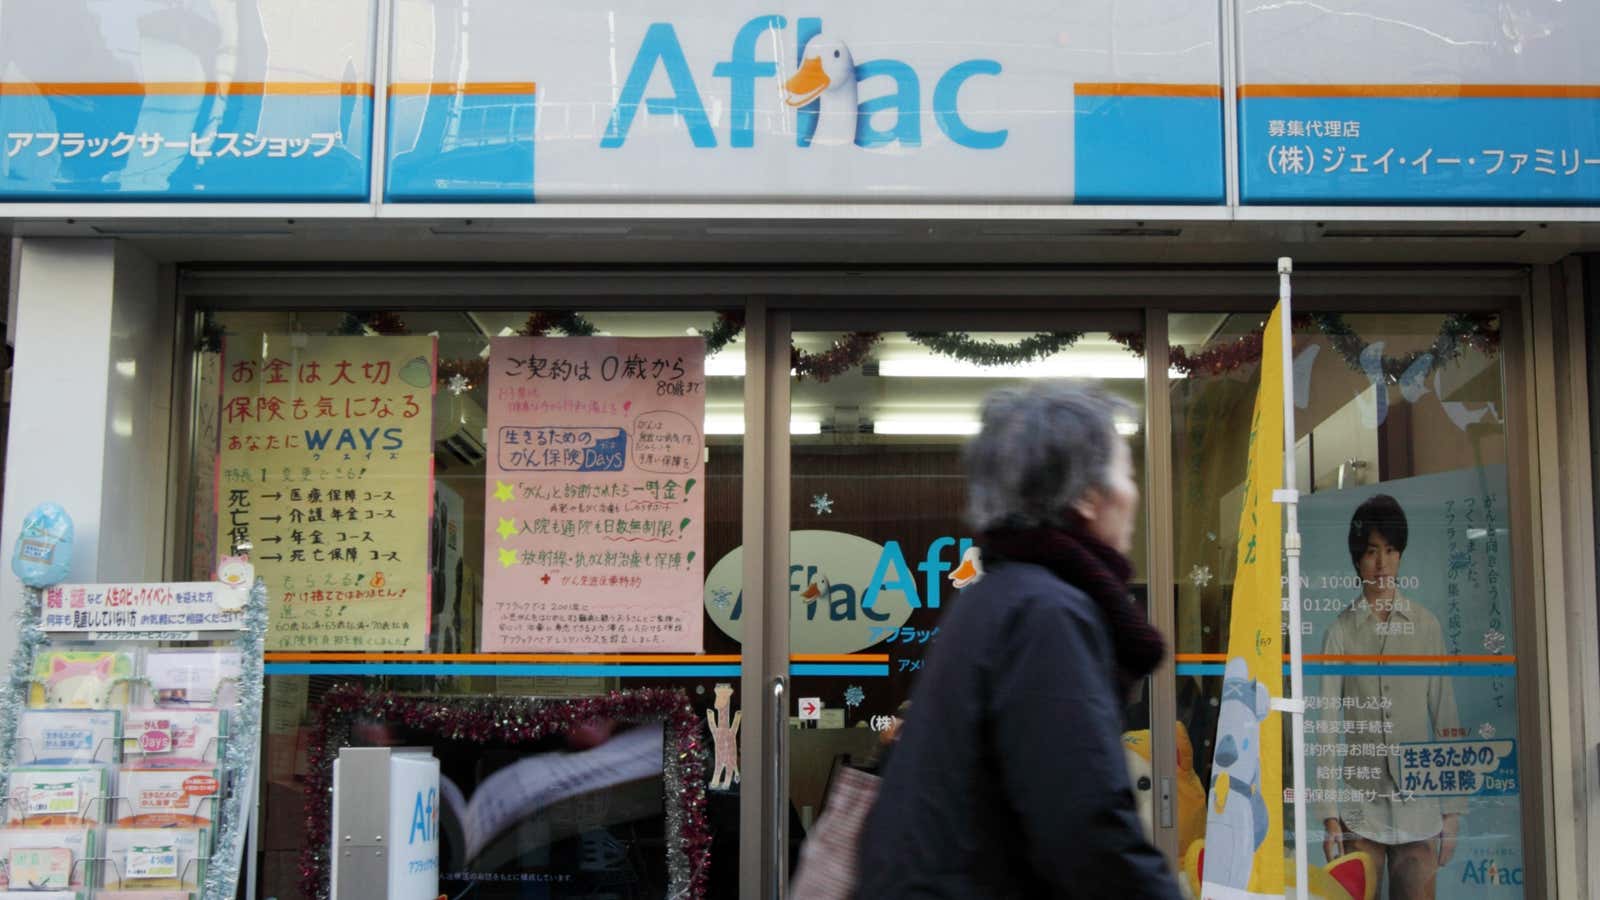 Aflac’s focus on cancer is the cornerstone of its all-important market: Japan.